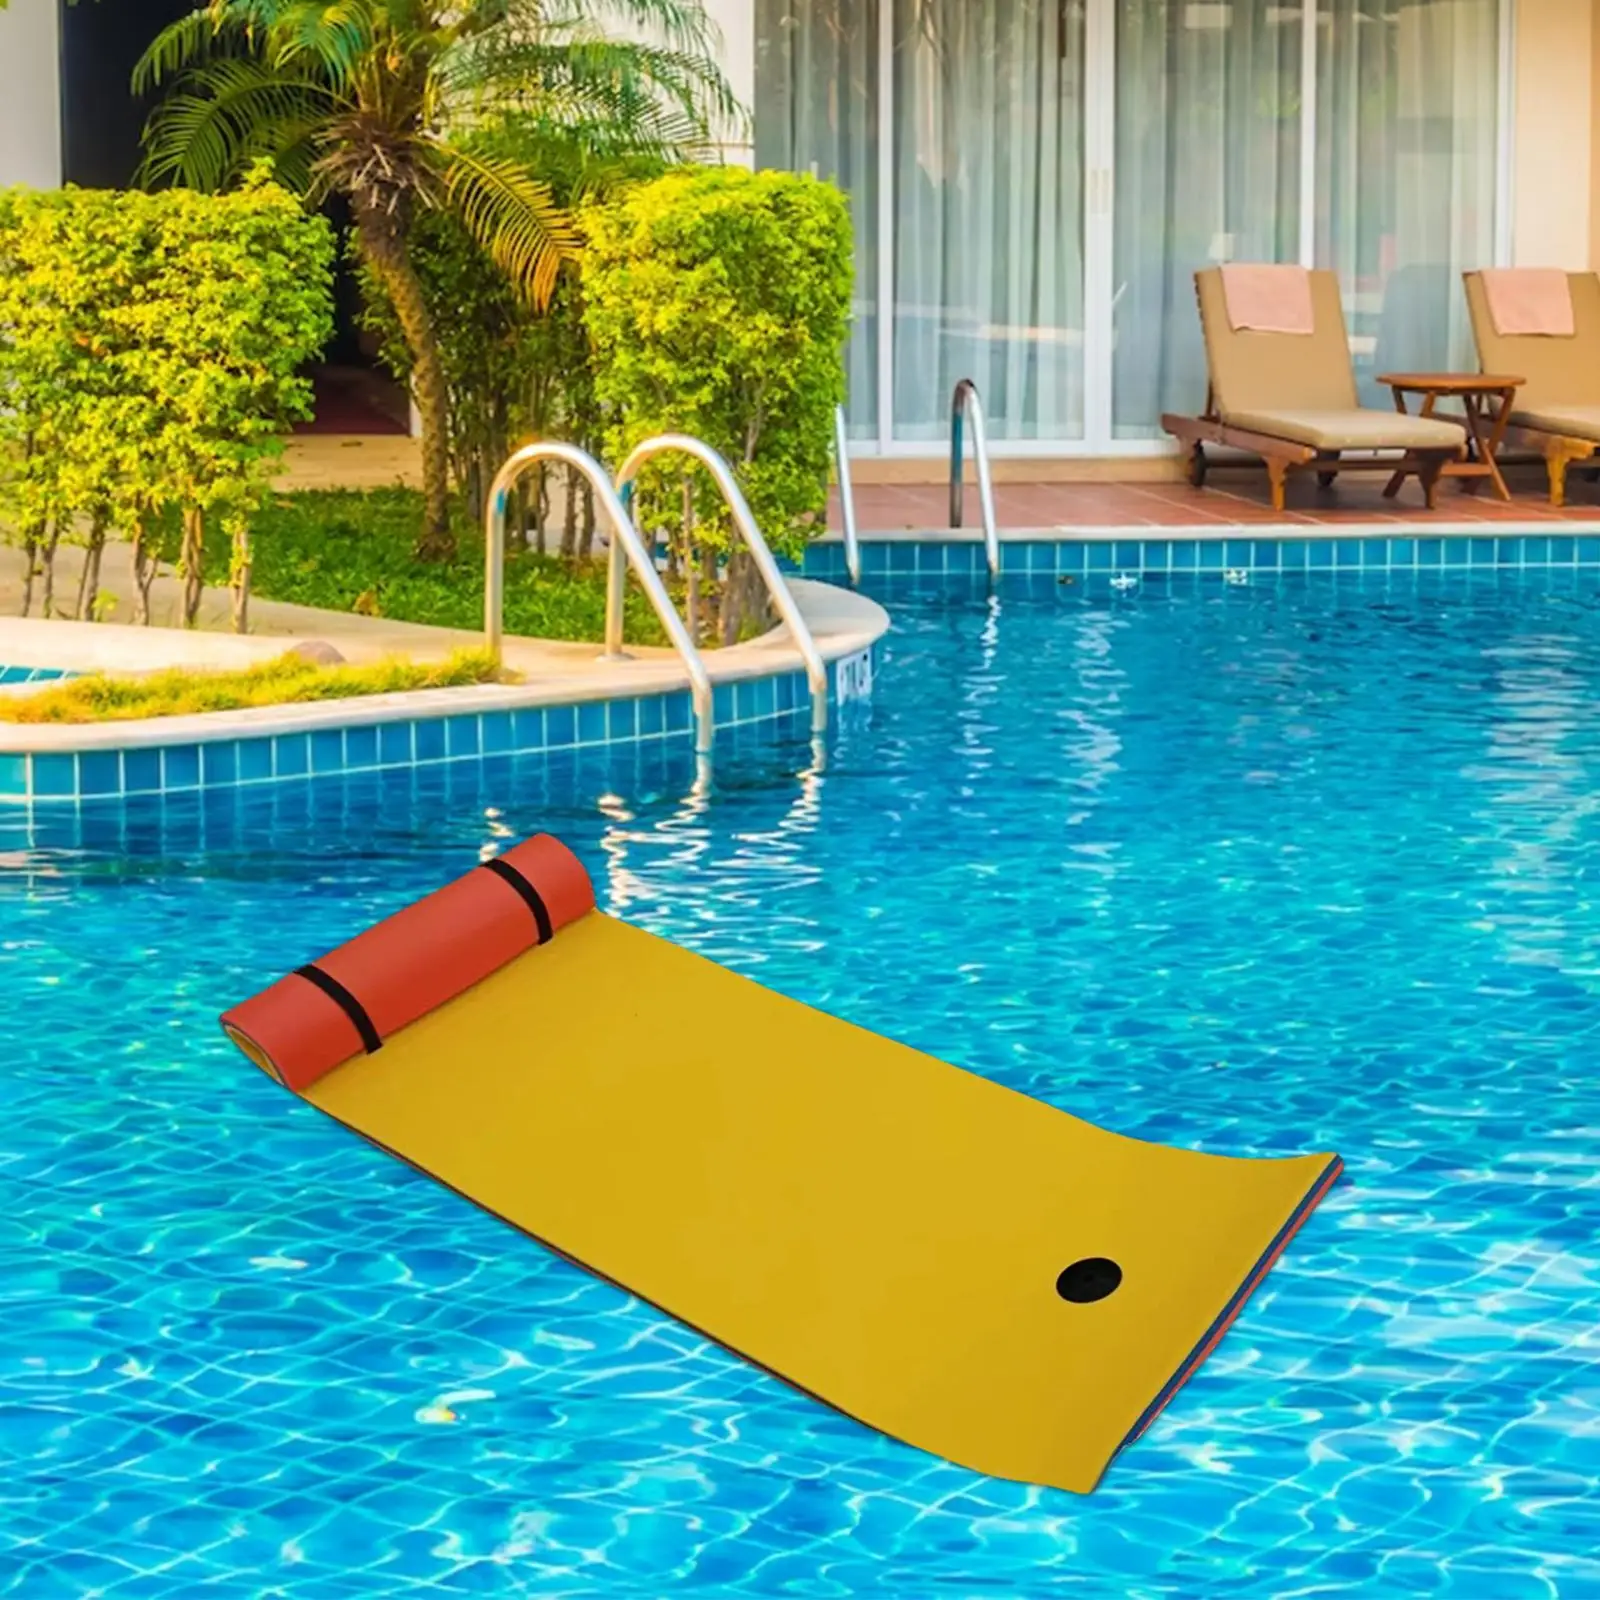 Water Float Mat Foam Floating Pad Floats Mattress Floating for Swimming Pool